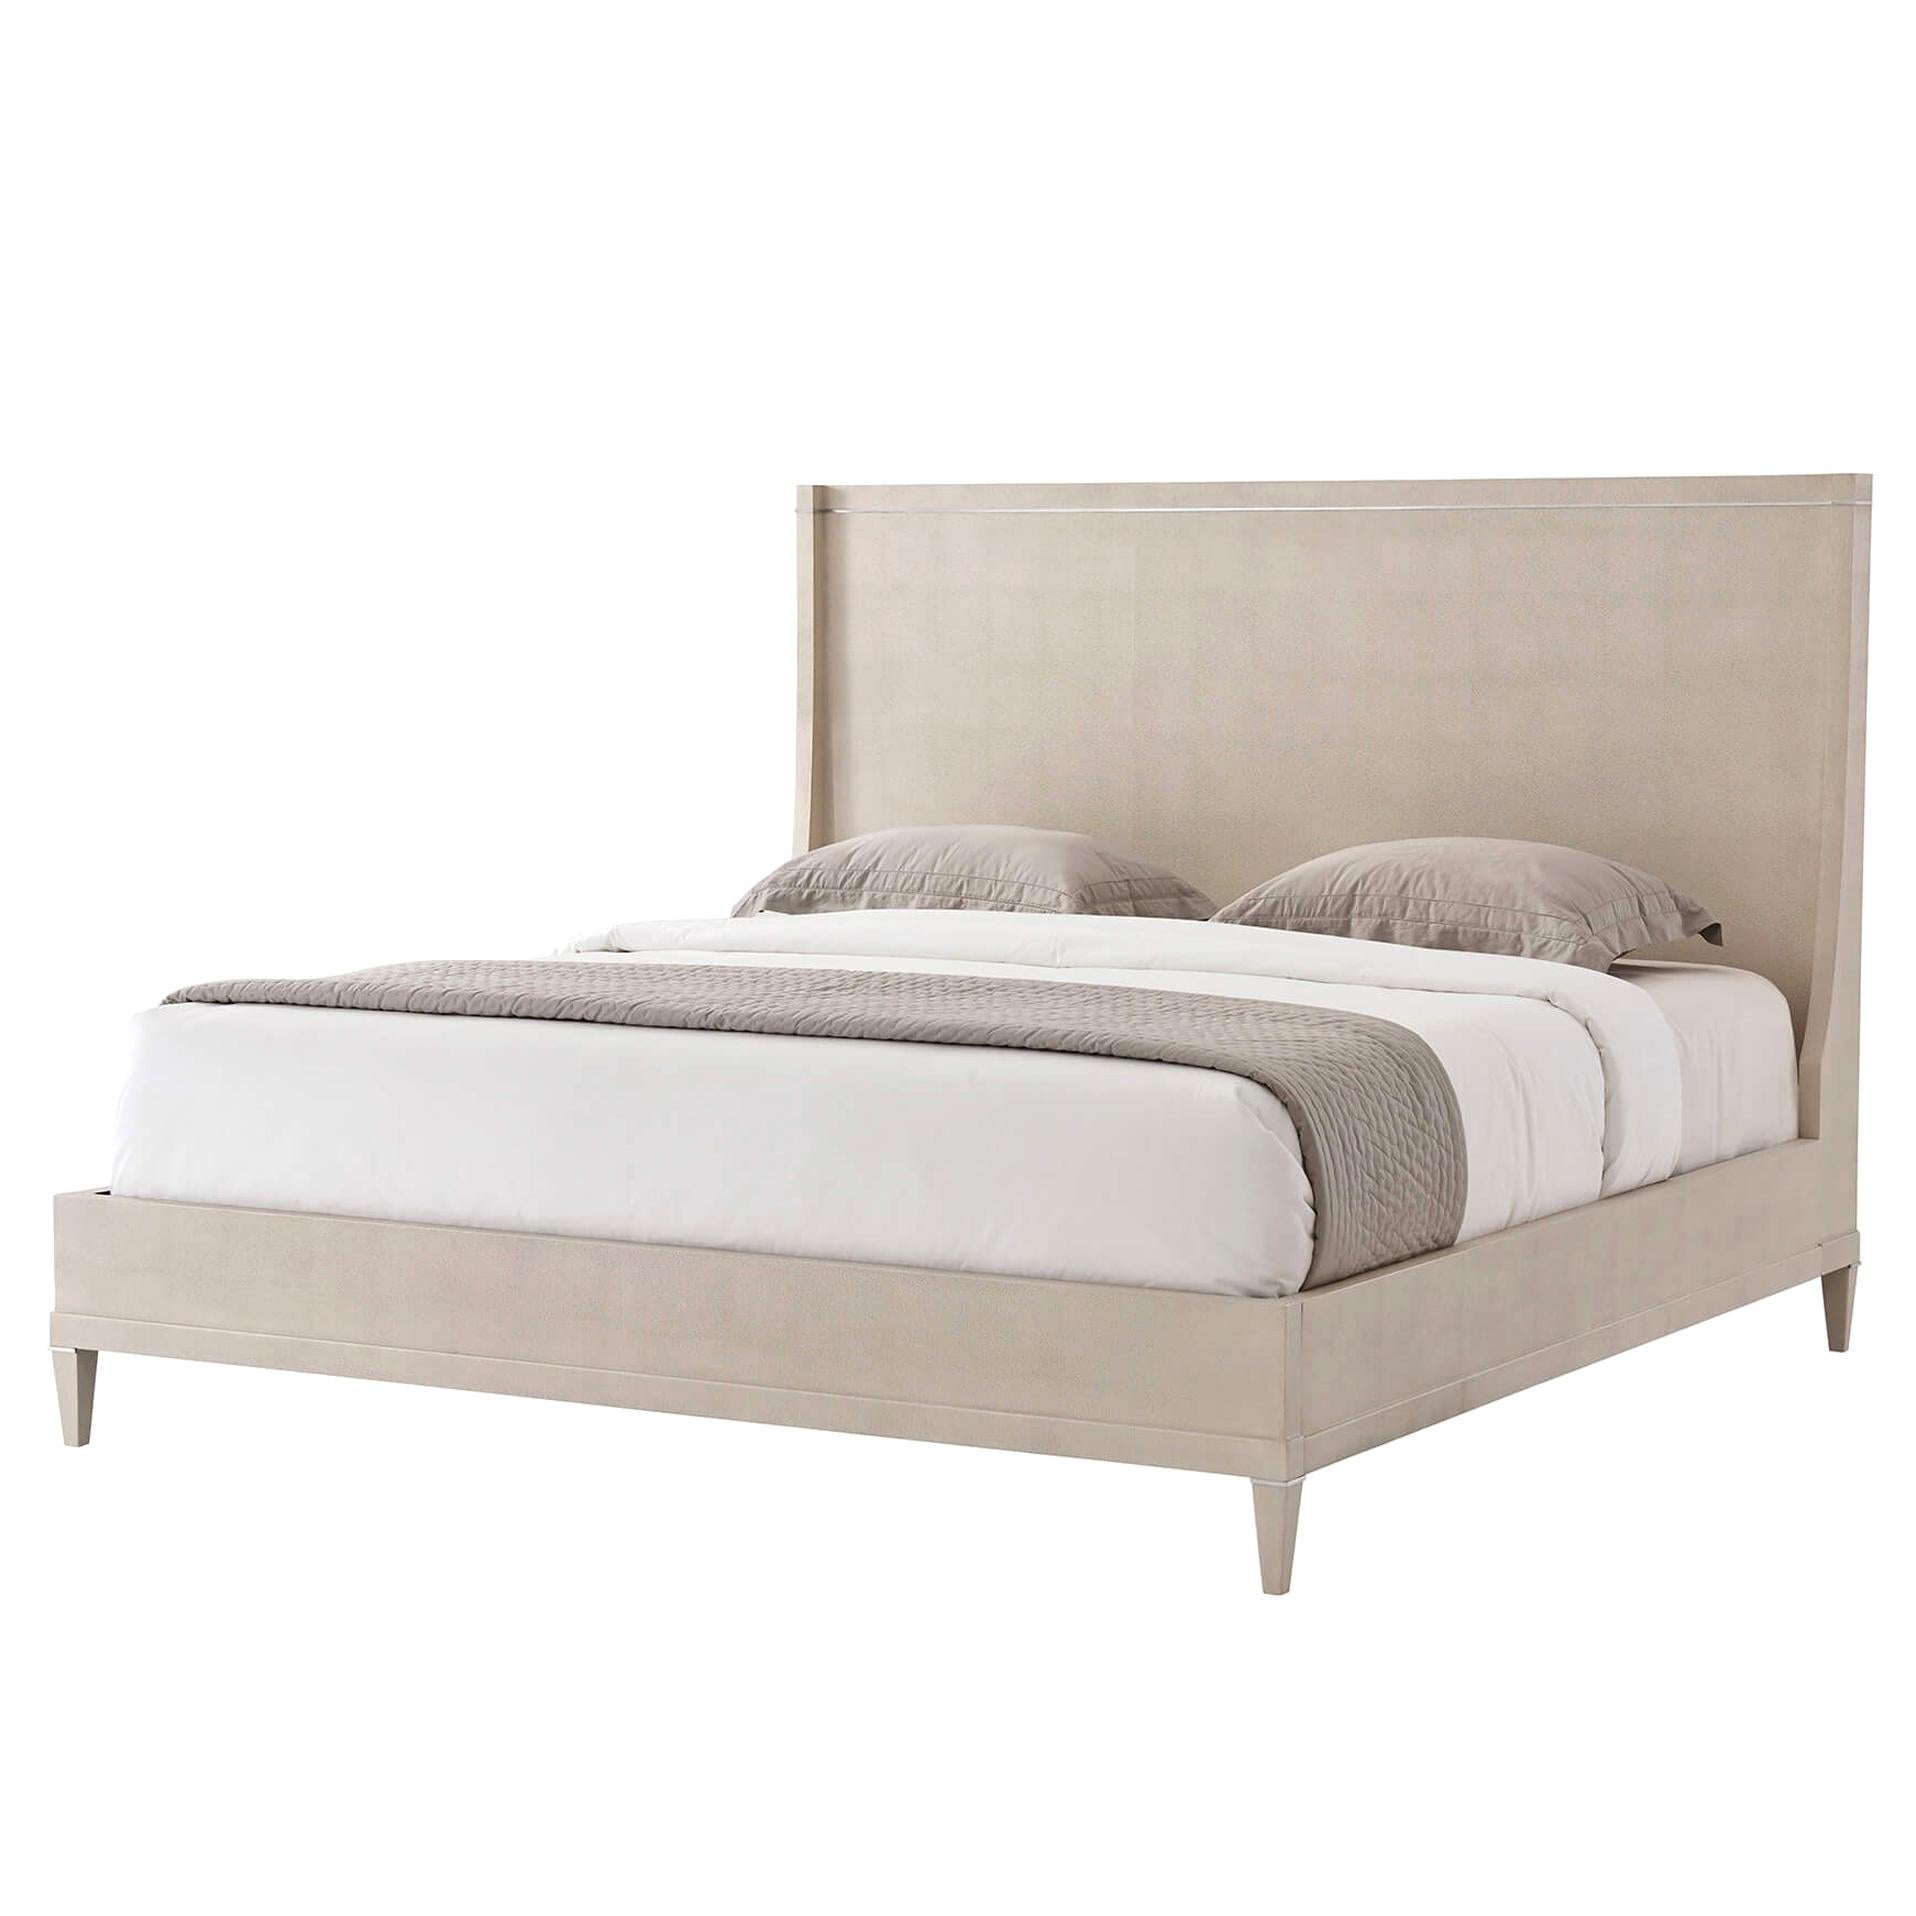 Modern Leather Wrapped King Size Bed For Sale